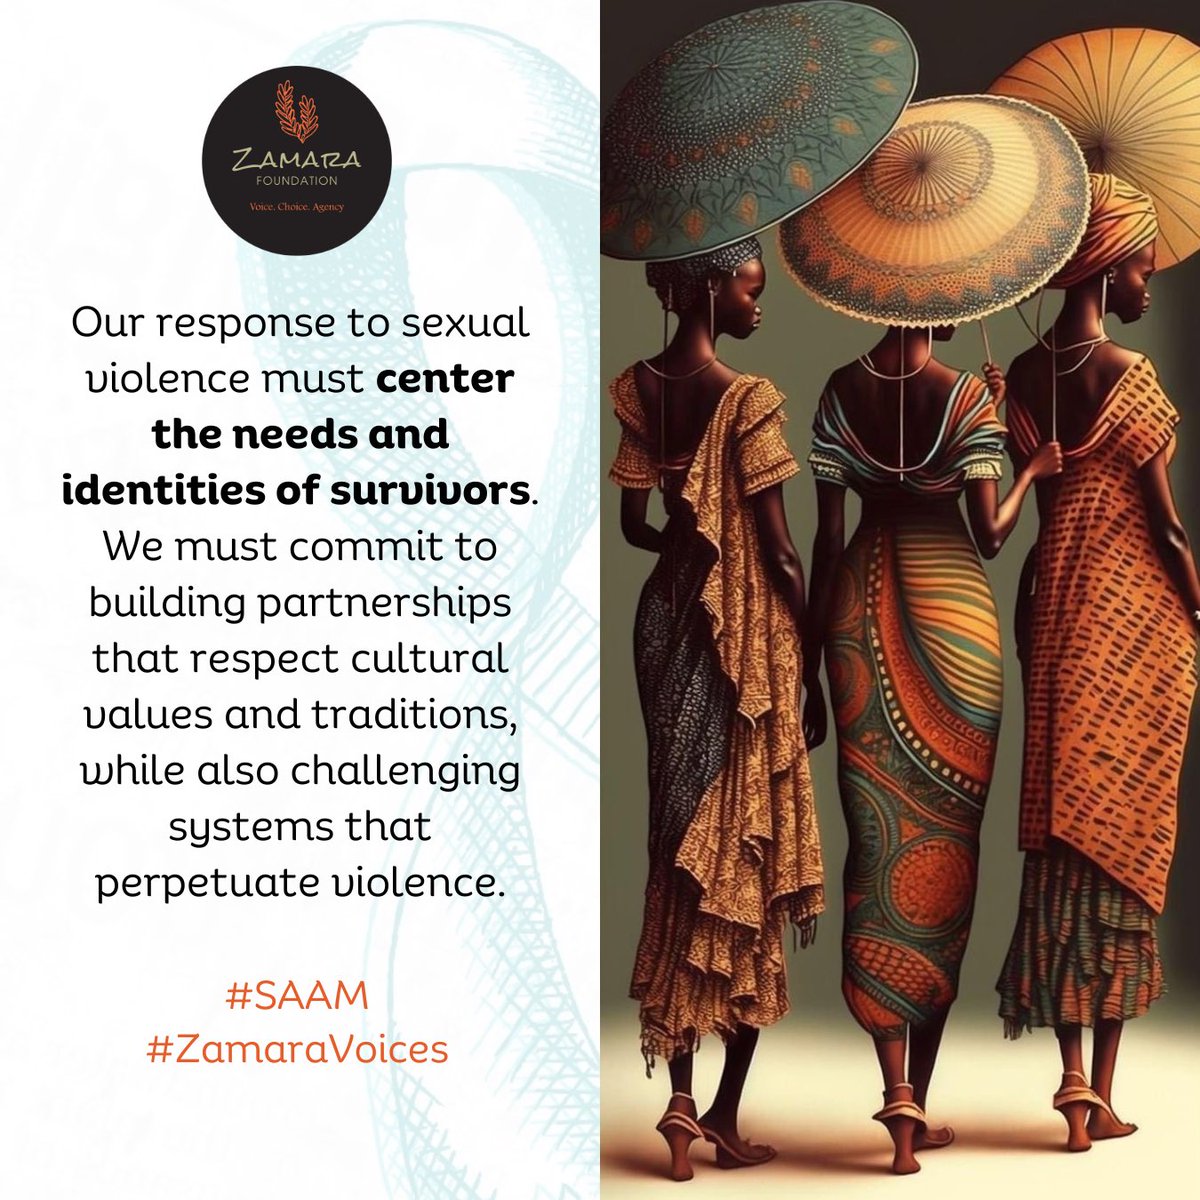 #SAAM! We should explore options beyond the immediate crisis response, focusing on long-term healing and dismantling the root causes of sexual assault in our communities. #ZamaraVoices